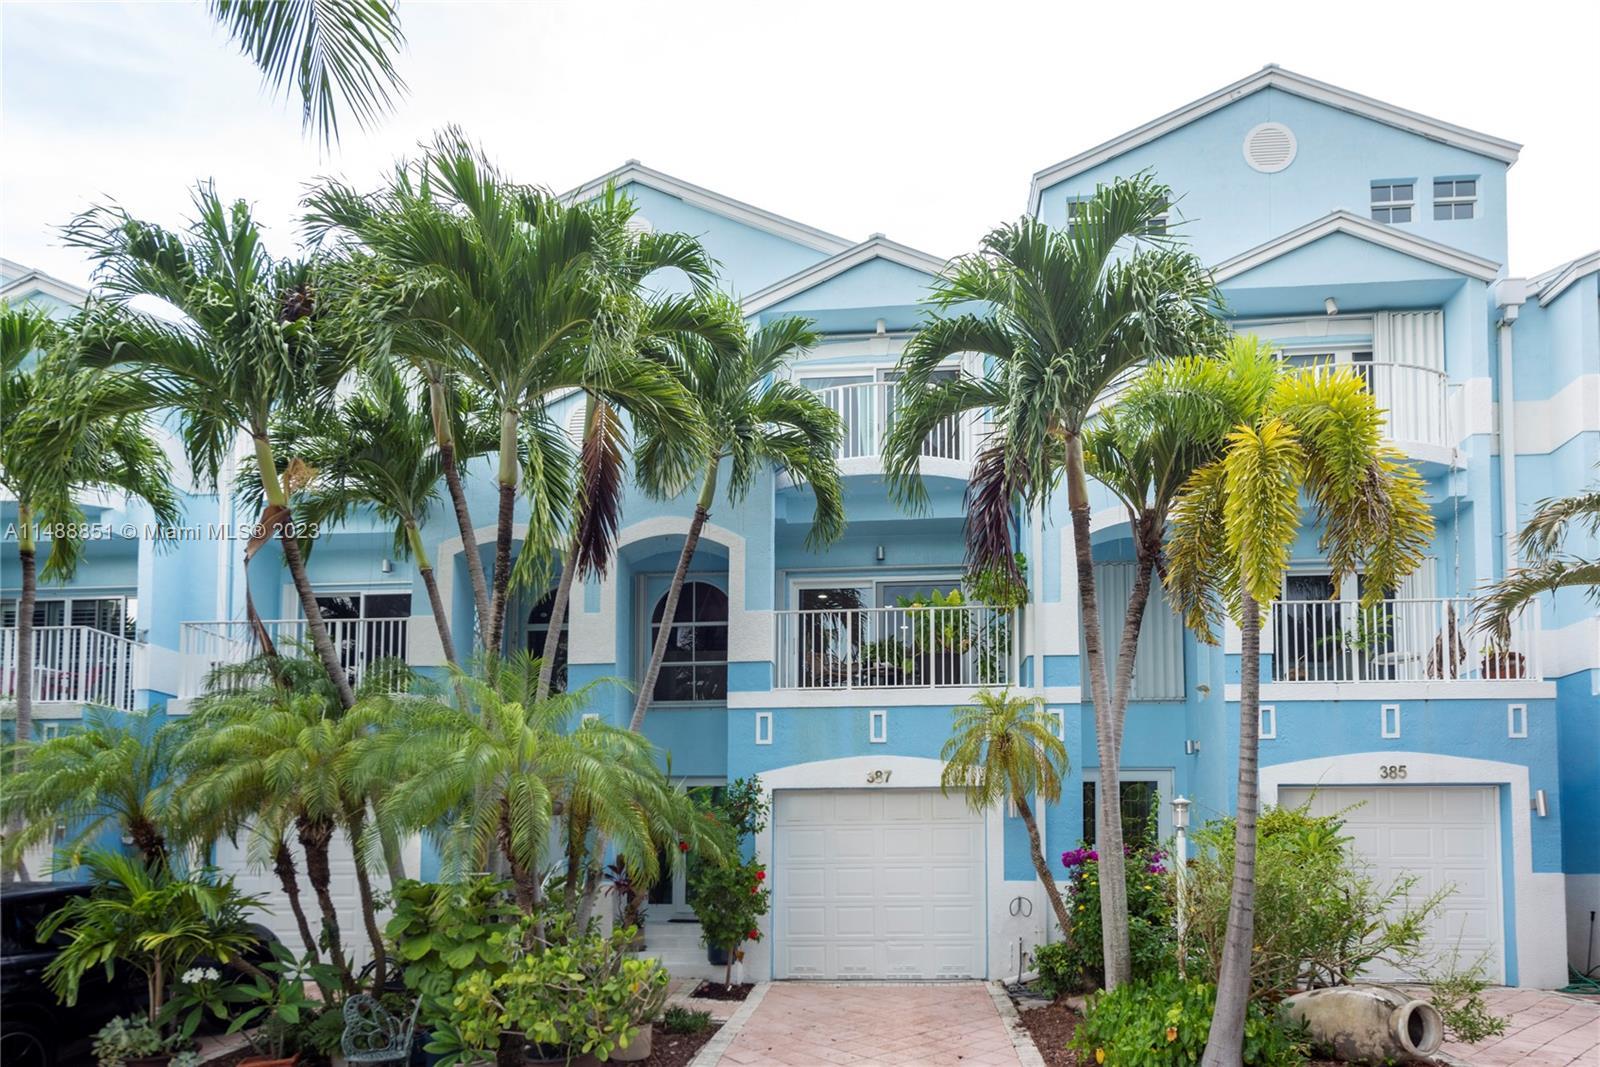 Photo of 387 Franklin St in Hollywood, FL